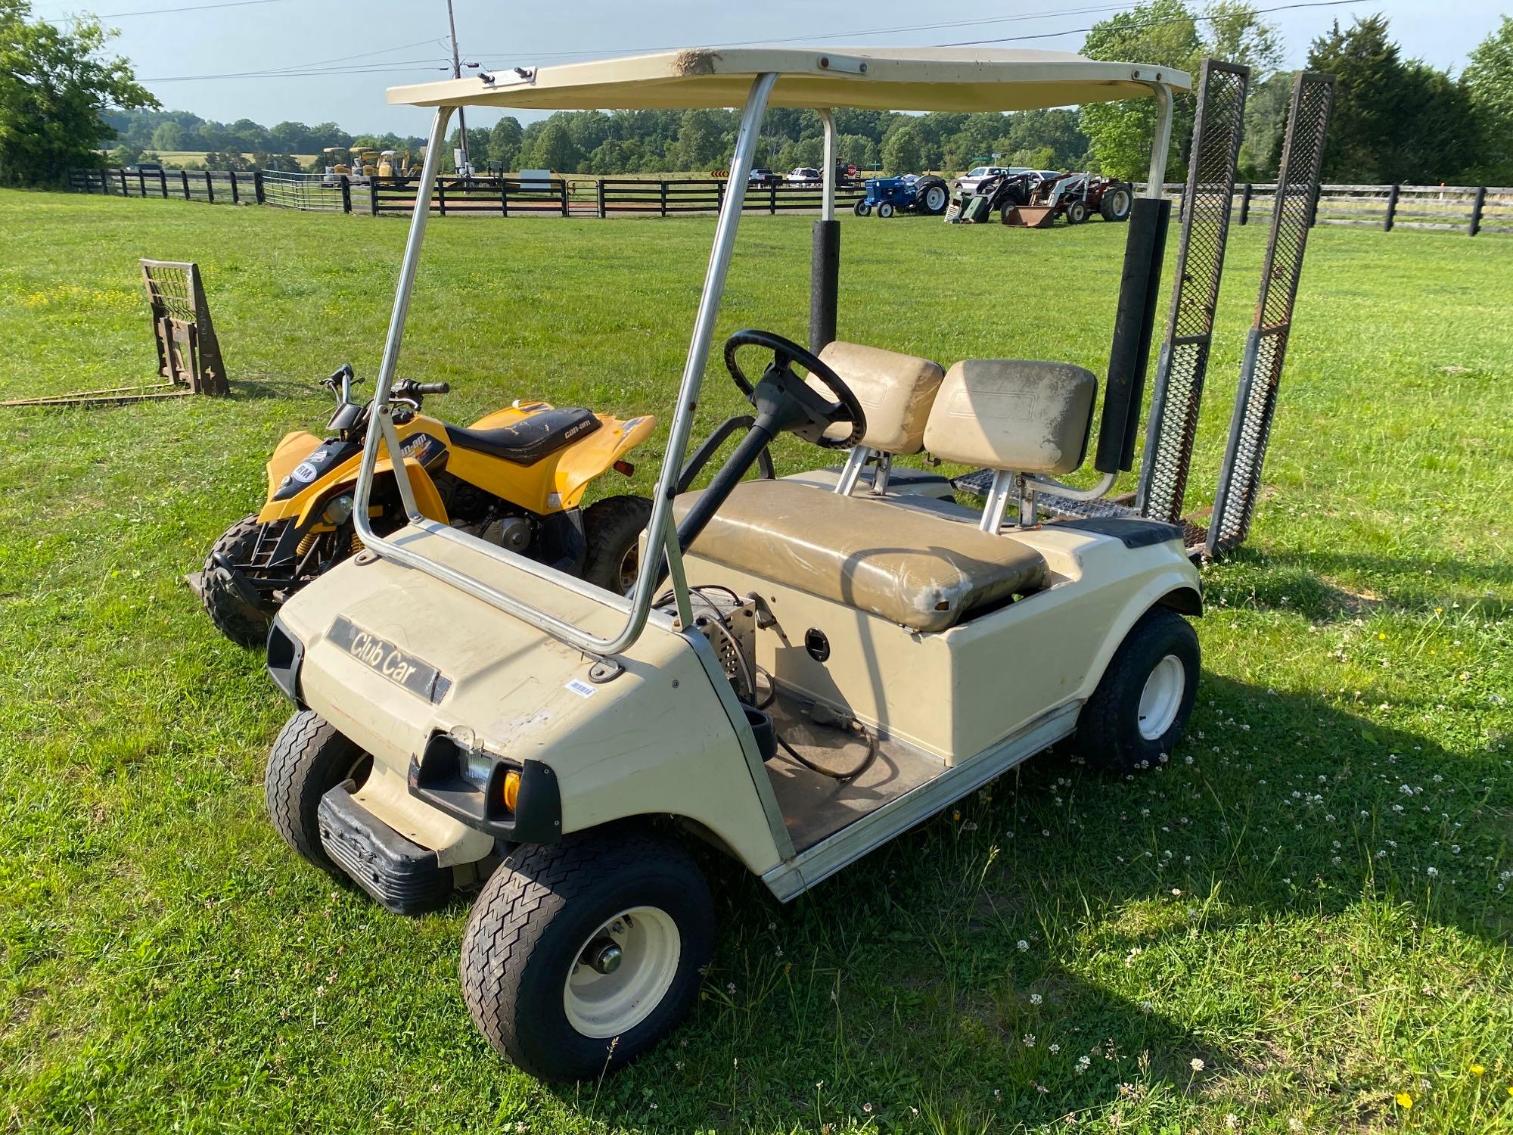 Image for Club Car Electric Golf Cart w/ Charger, Per seller needs batteries